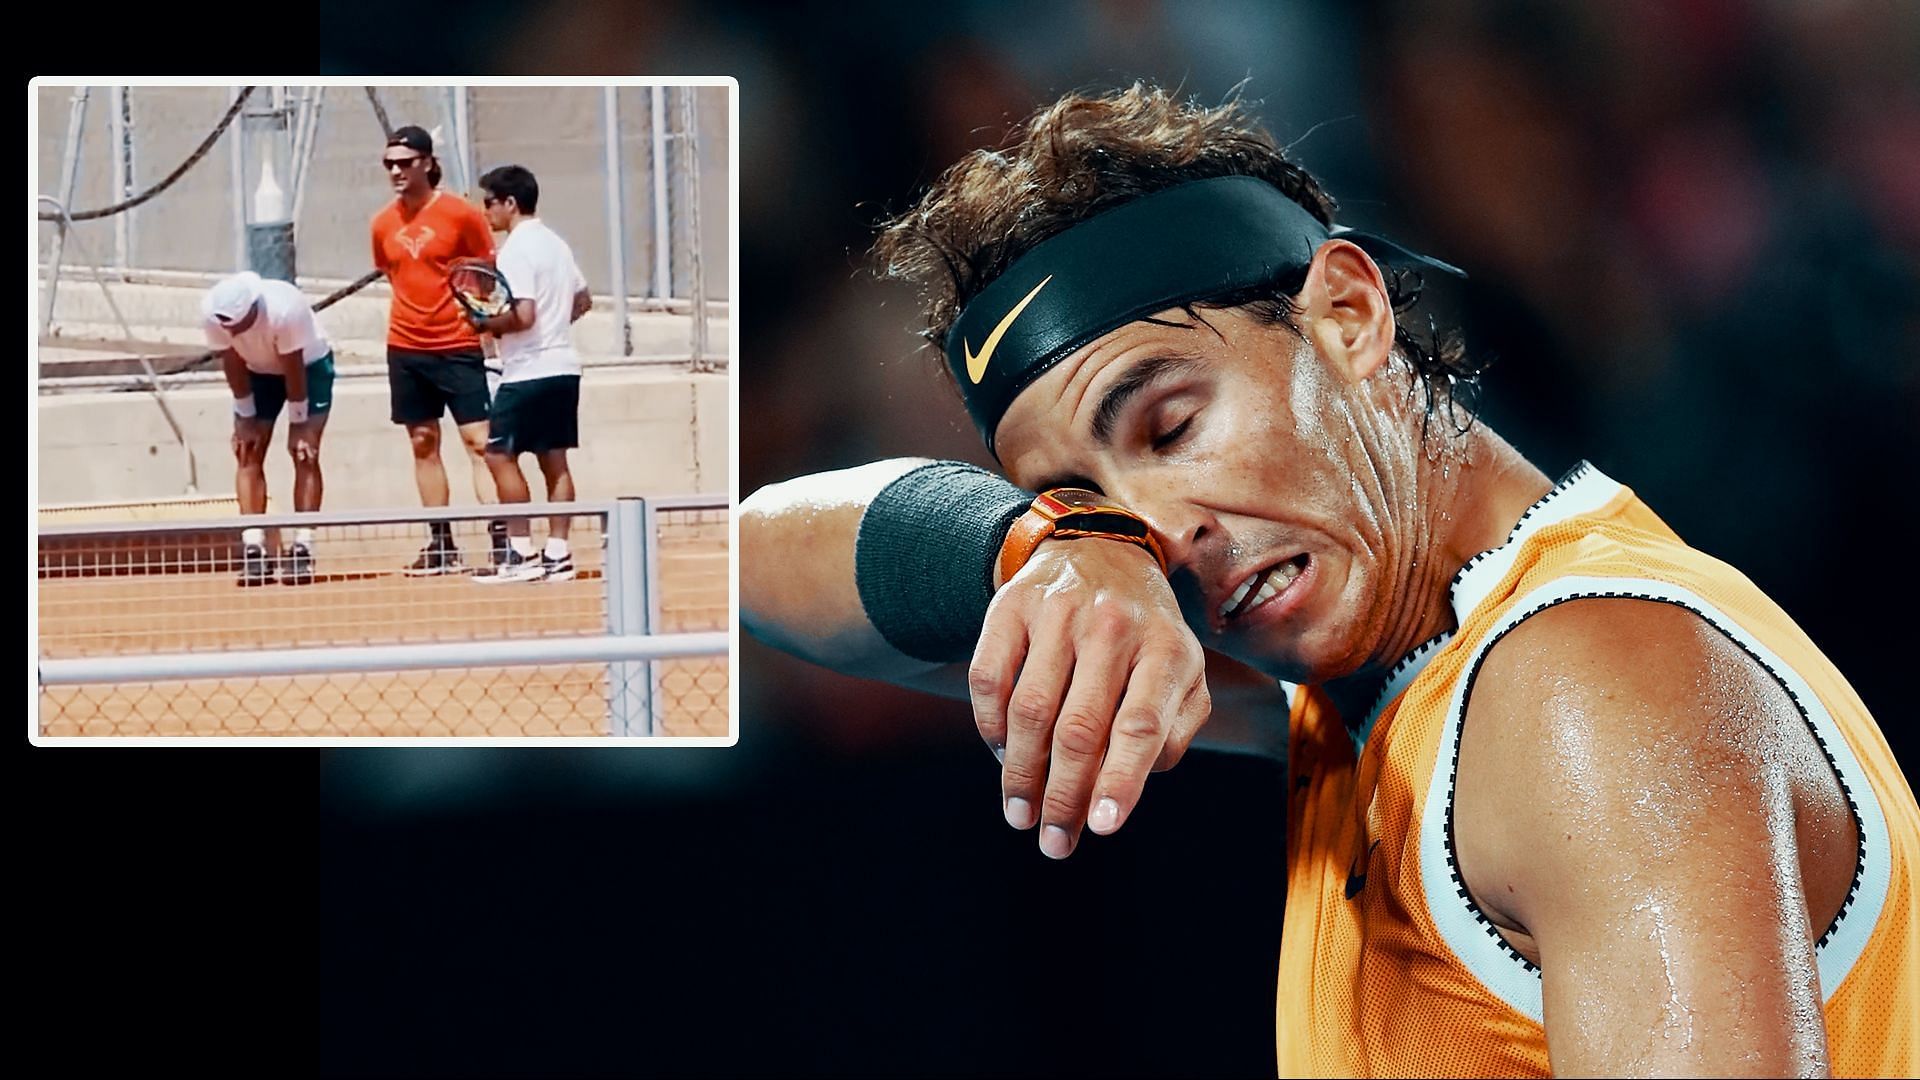 Latest practice video of Rafael Nadal ahead of French Open sends fans into a tizzy